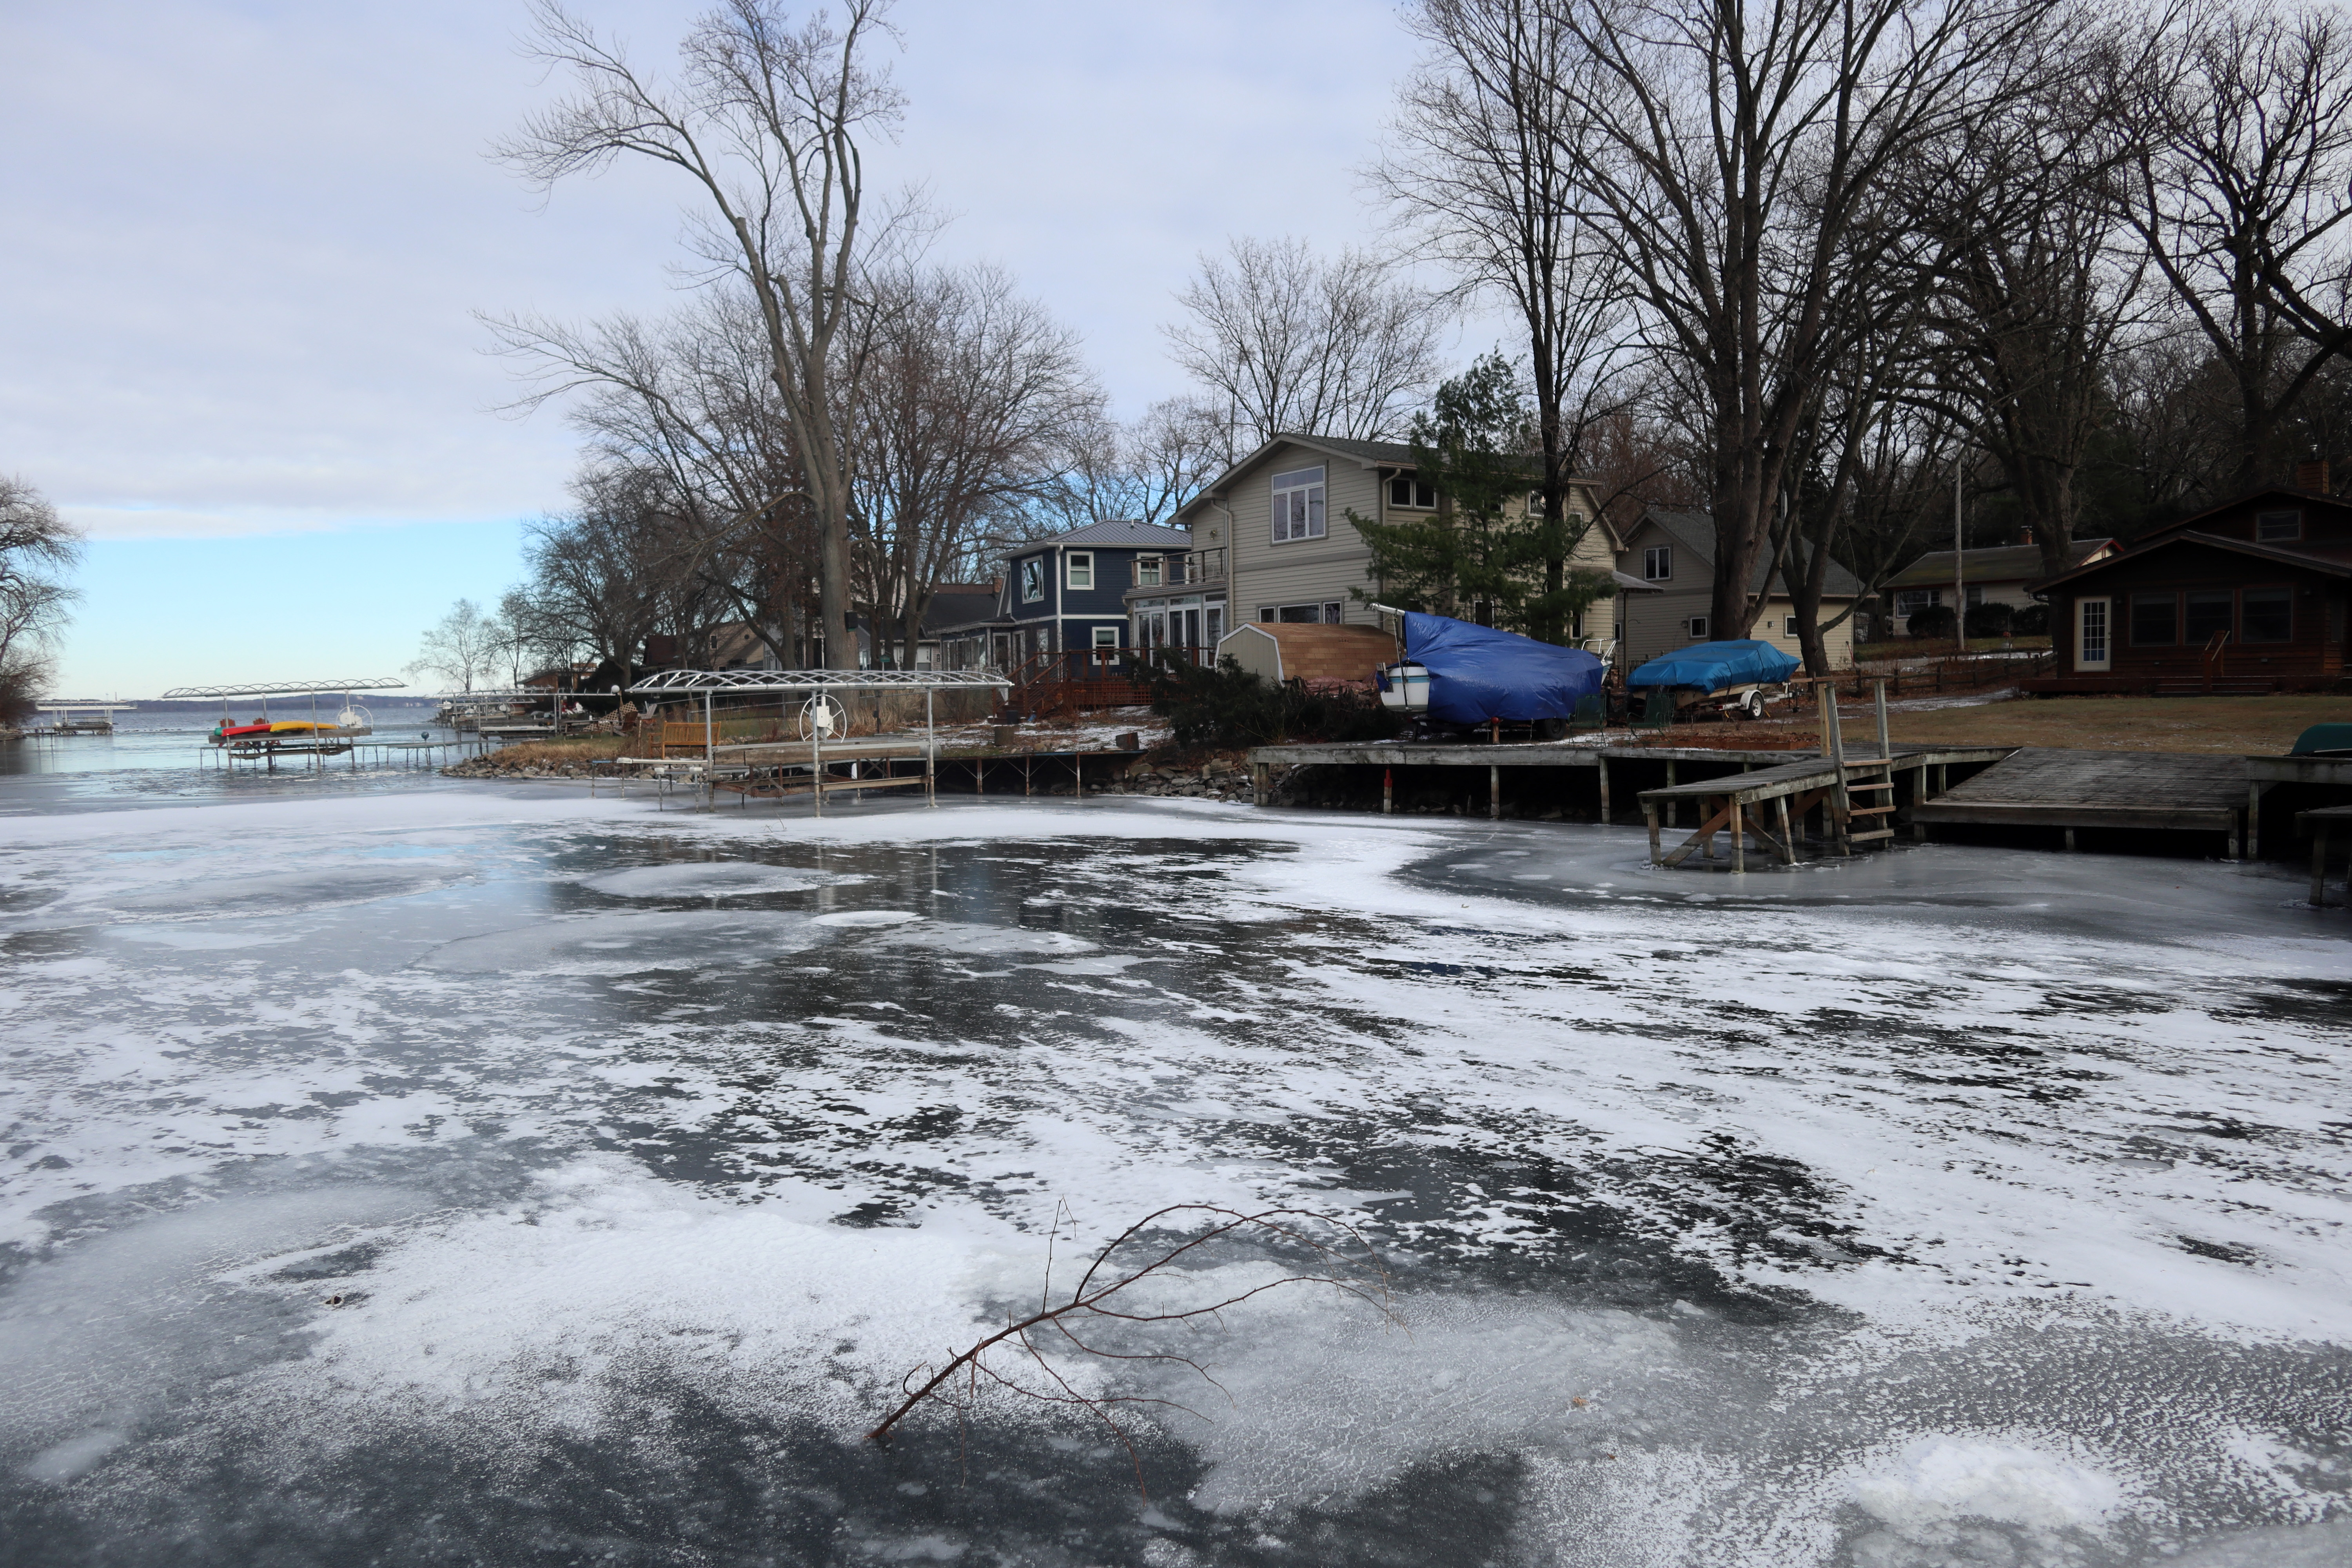 Frozen Harbor and ice in Madison, Wisconsin image - Free stock photo ...